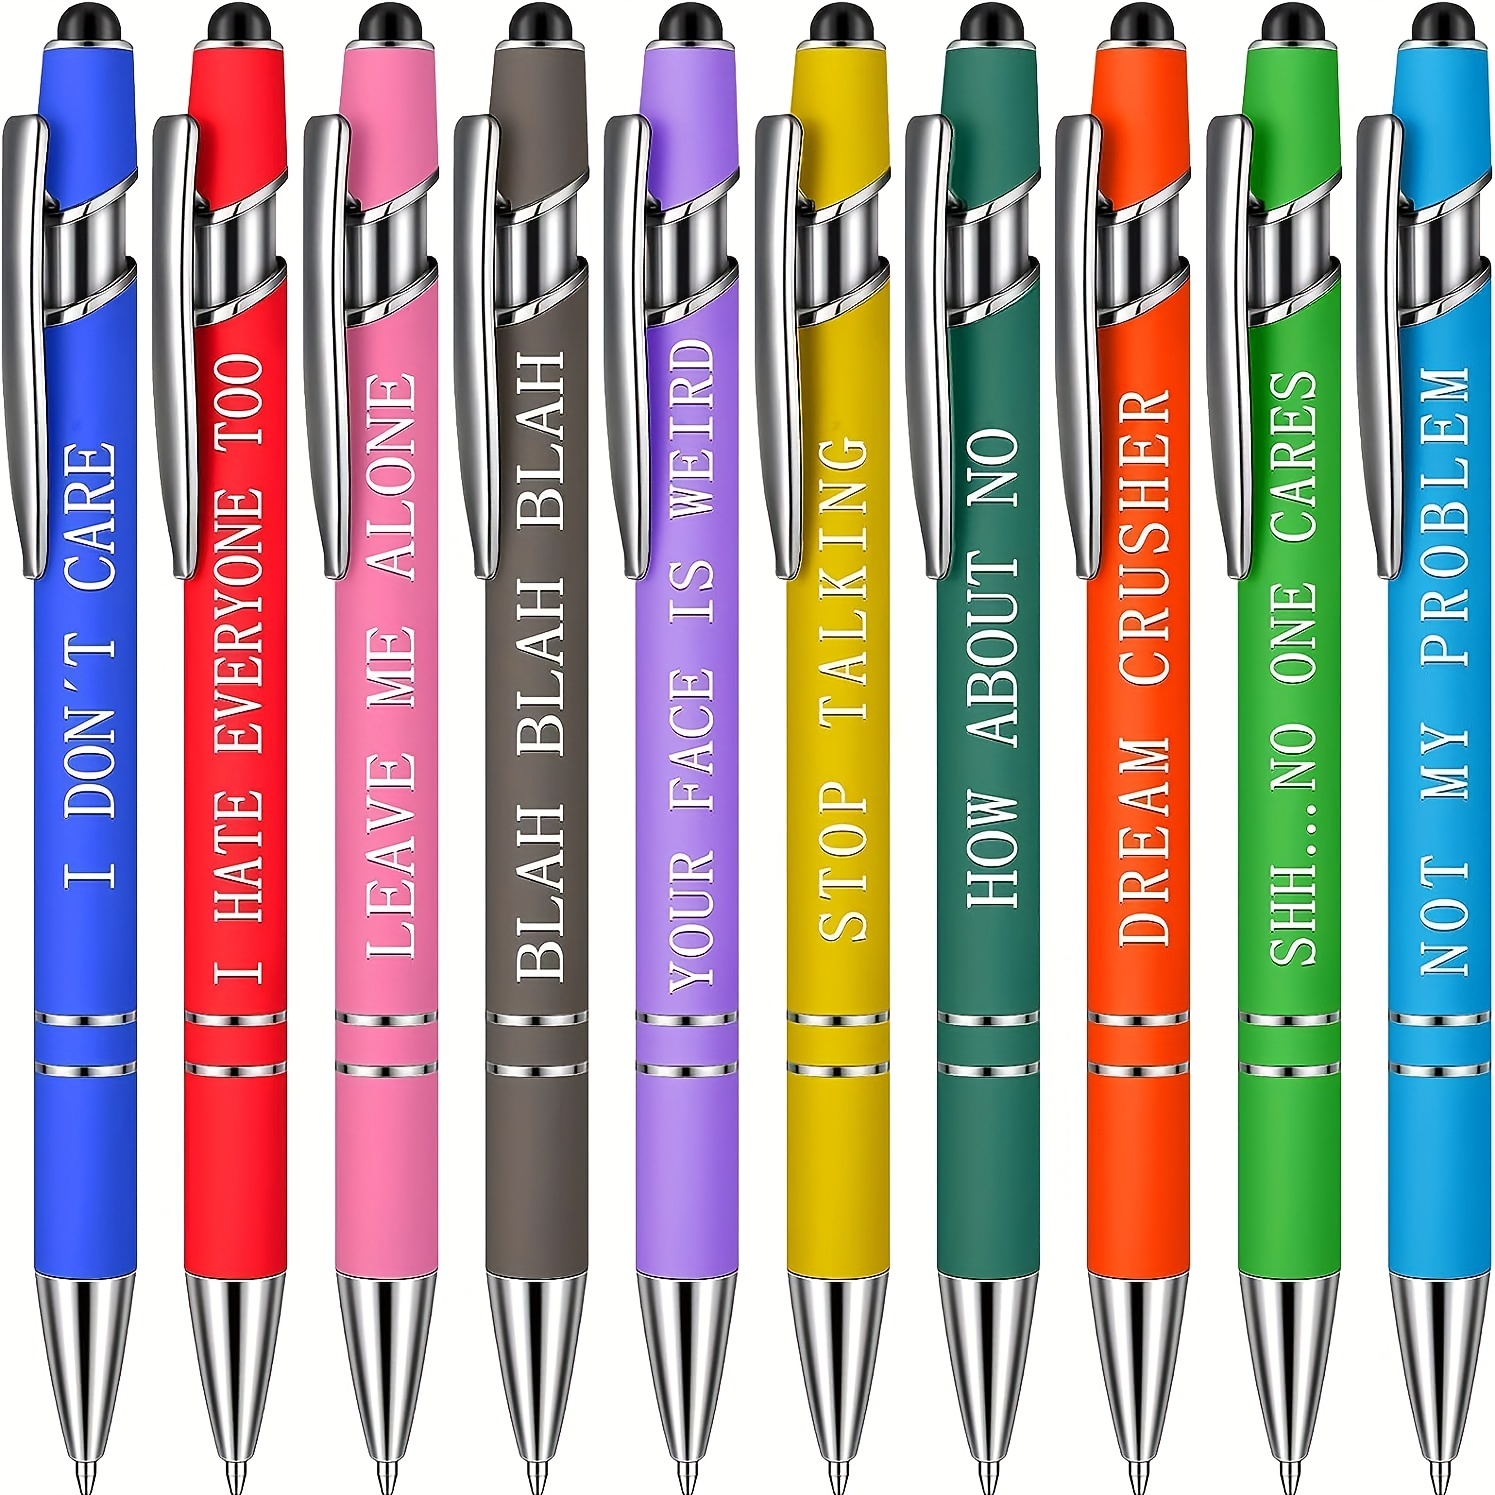 Planet Pens Sloth Novelty Pen - Cute Funny Pens for Kids, Teens and Adults,  Fun Cool Ball Point Pen for School Writing and Unique Office Supplies, Cute  Sloth Pen Gift for Men